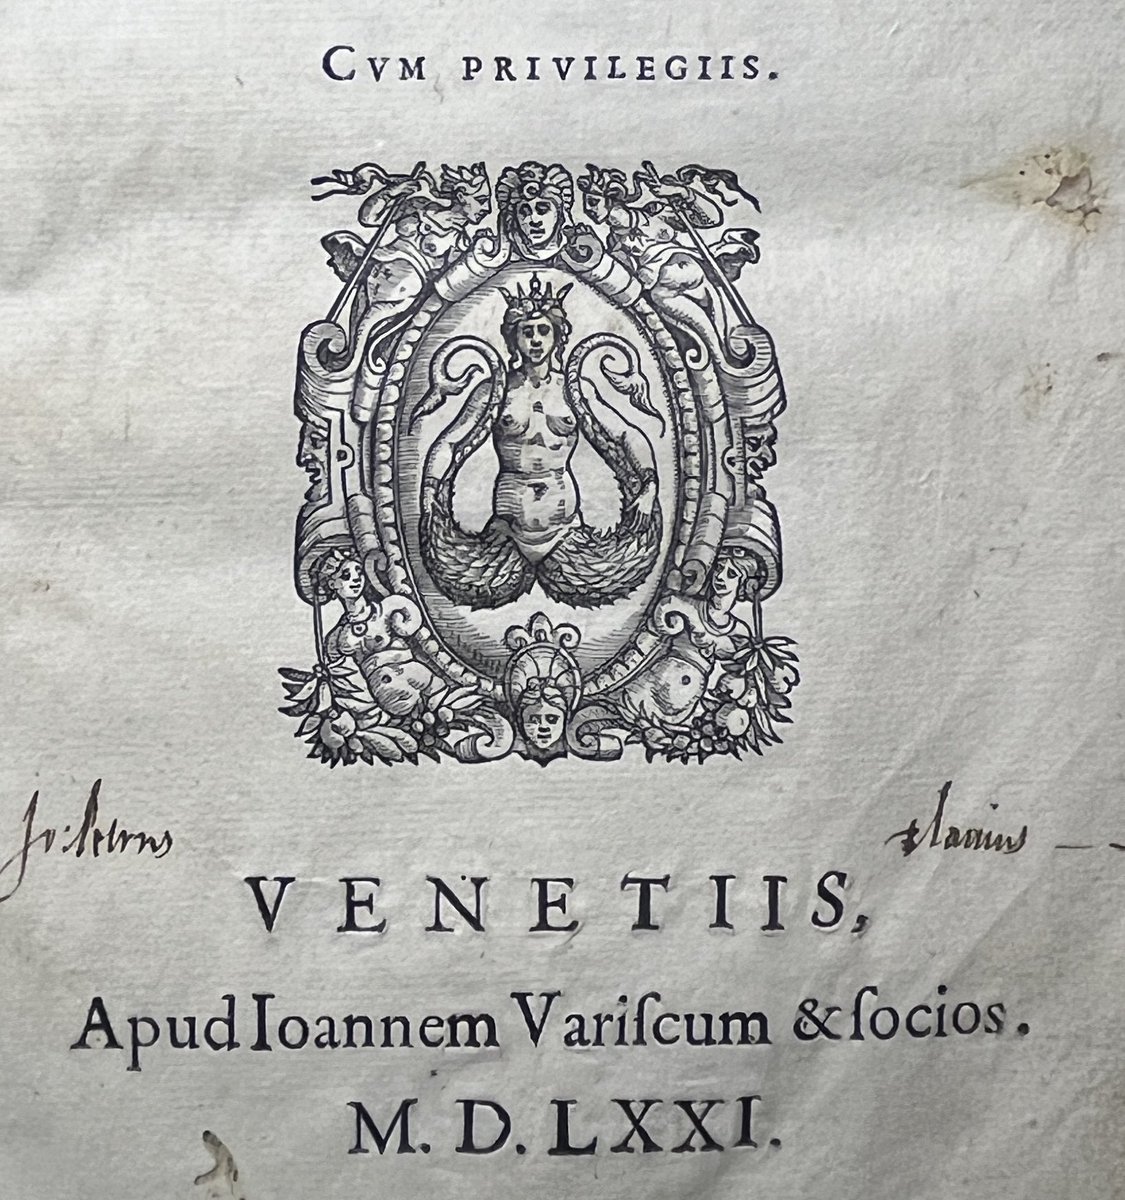 Think your #ThrowbackTuesday is vintage? Check out Varisco's 1571 Venetian printer's mark. #Starbucks, your mermaid might have some explaining to do about her long-lost twin looking fabulous after 450 years! #Retro #Twinning #bookhistory